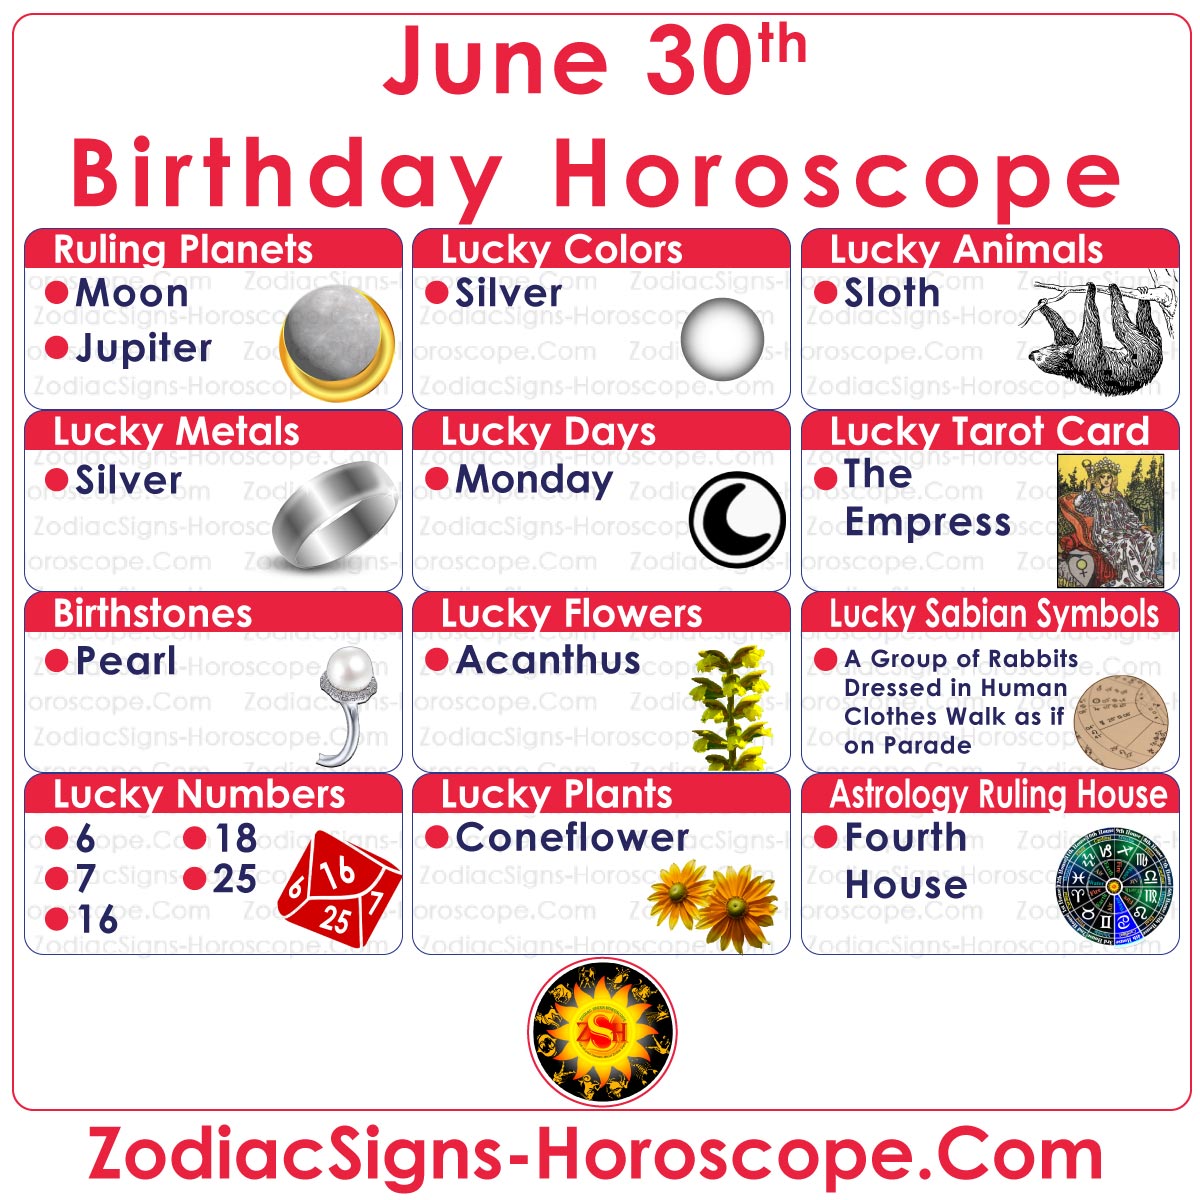 June 30 Zodiac Lucky Numbers, Days, Colors and more